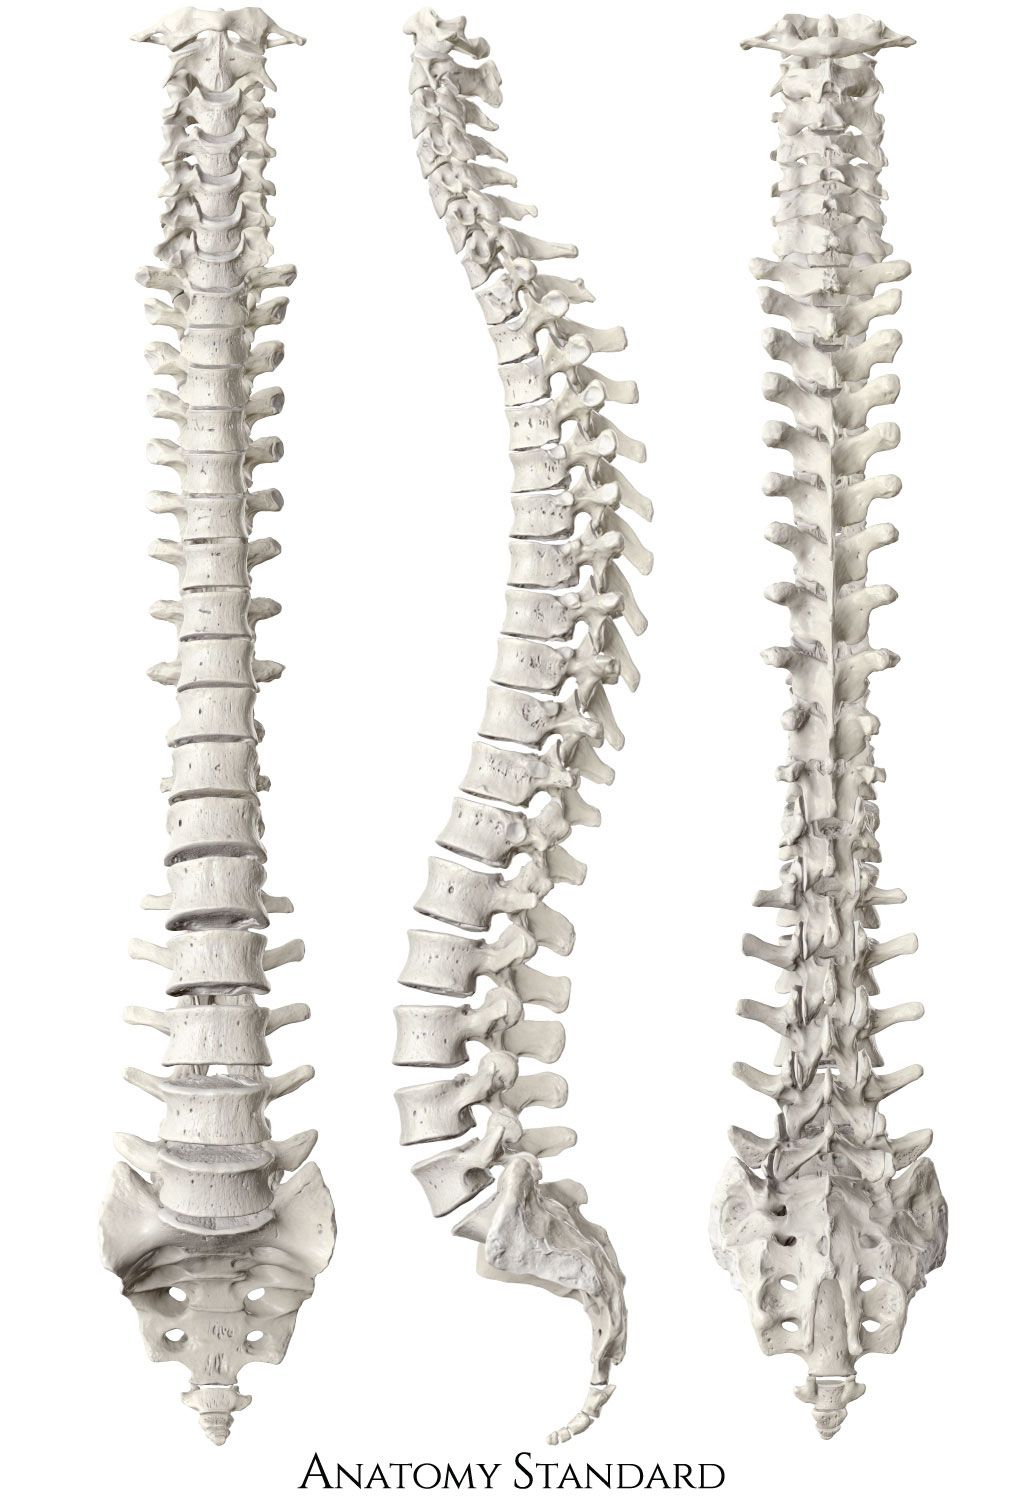 Human spine with anatomically precise kyphoses and lordoses